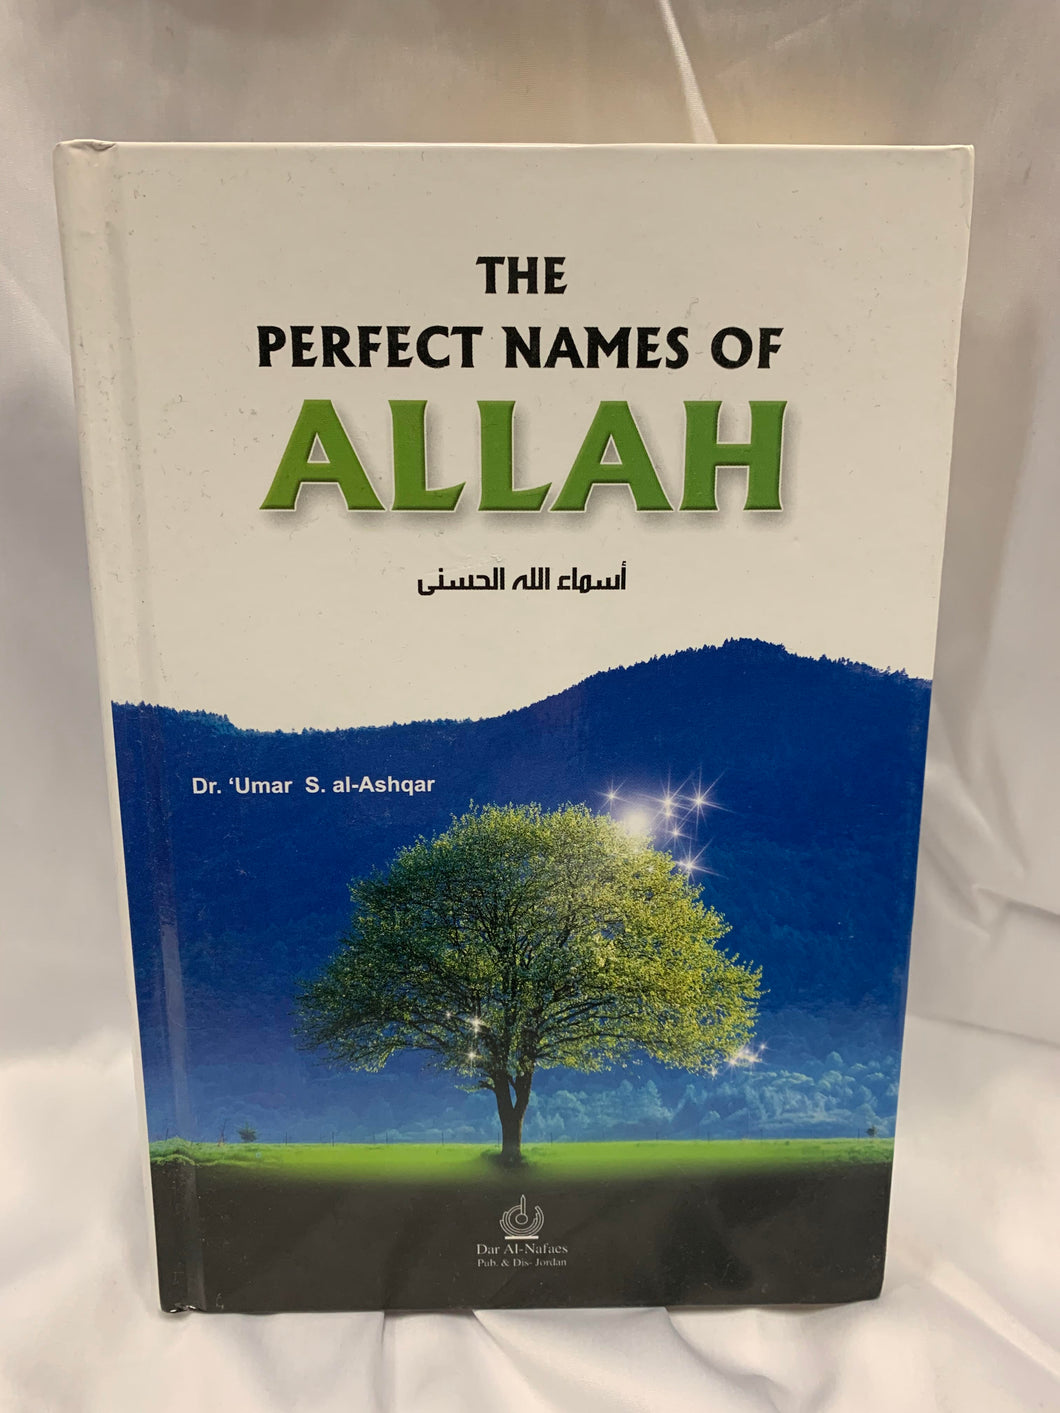 The Perfect Names of Allah